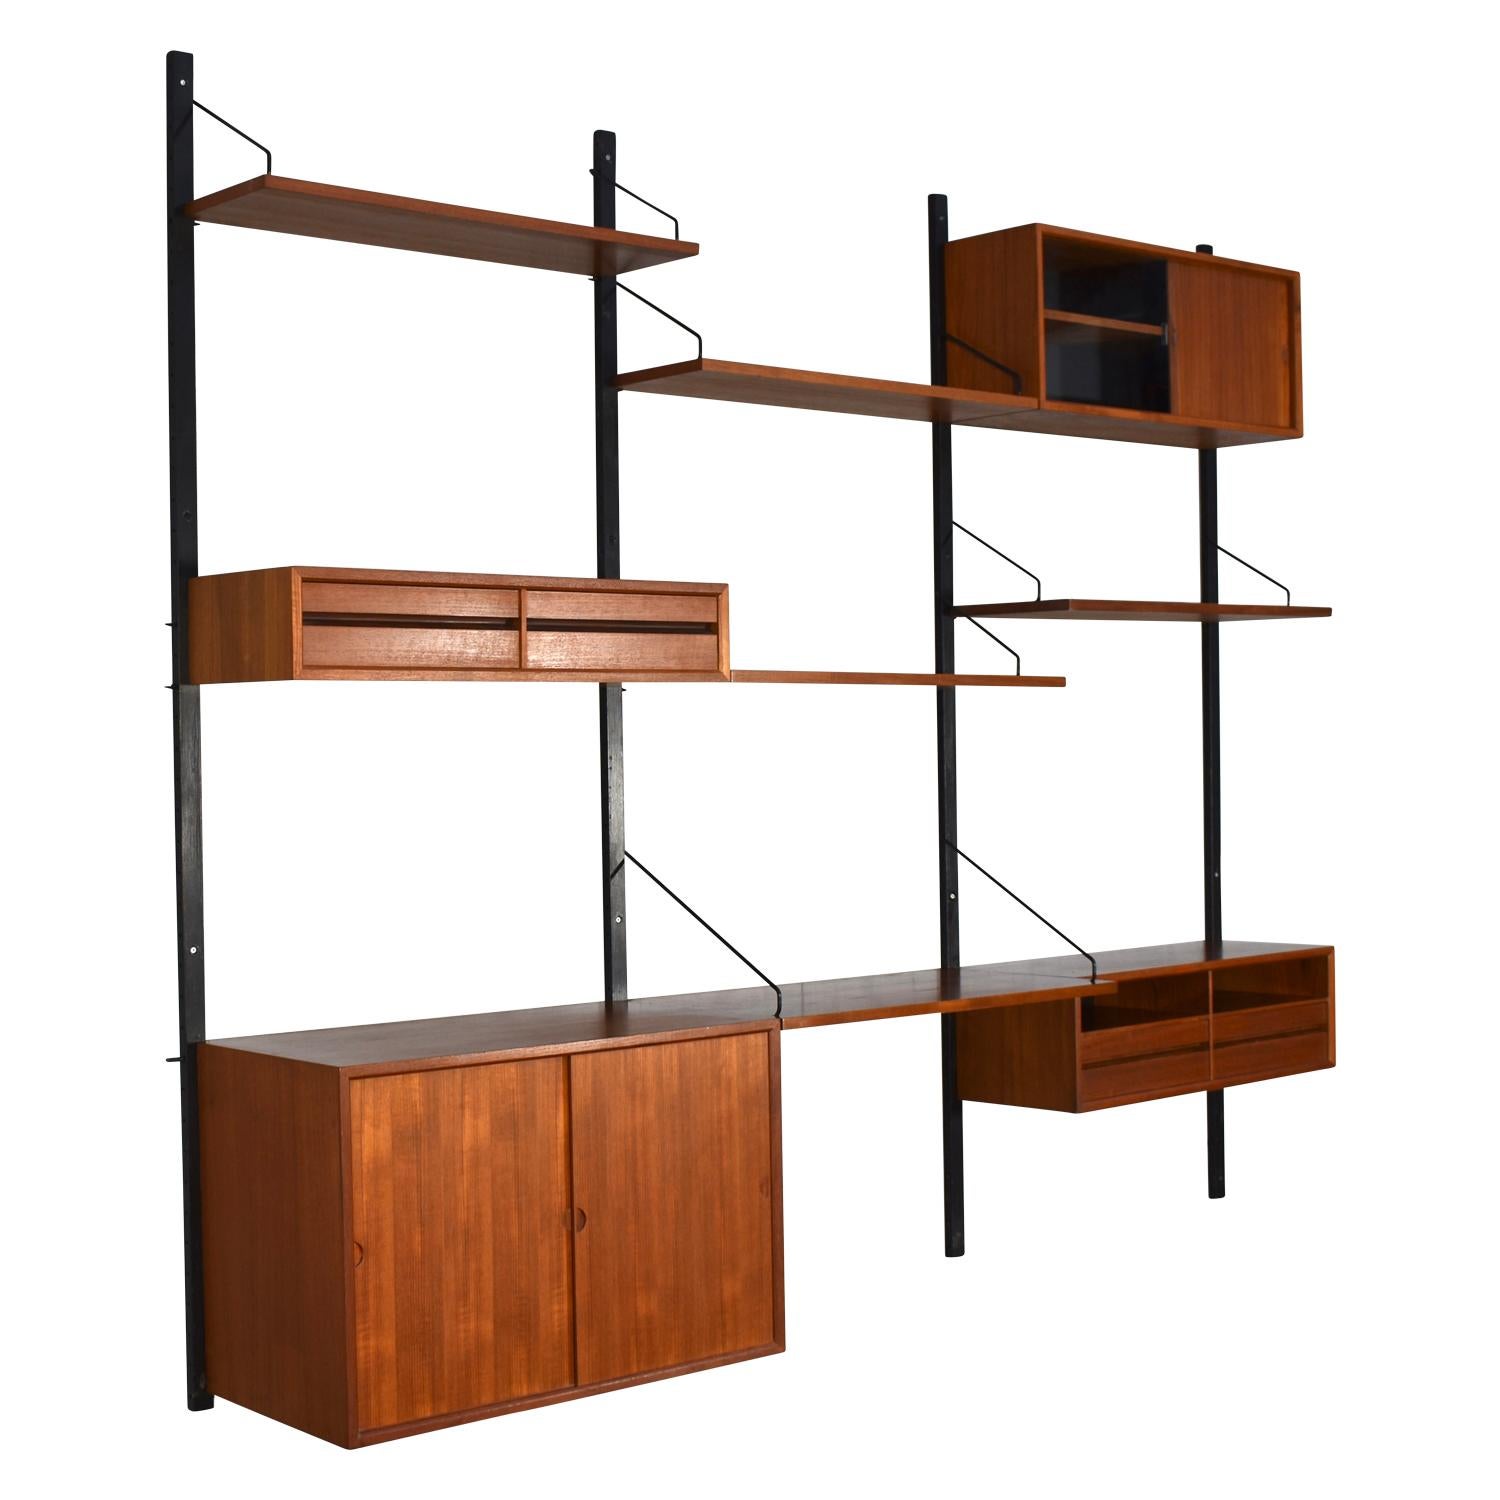 Gorgeous modular wall unit by Poul Cadovius. It features among others a much wanted magazine shelve and a woven front cabinet.
Royal series.
Teak
In very good, beautiful and original condition.
The unit contains:
- 4 cabinets
- 1 desk